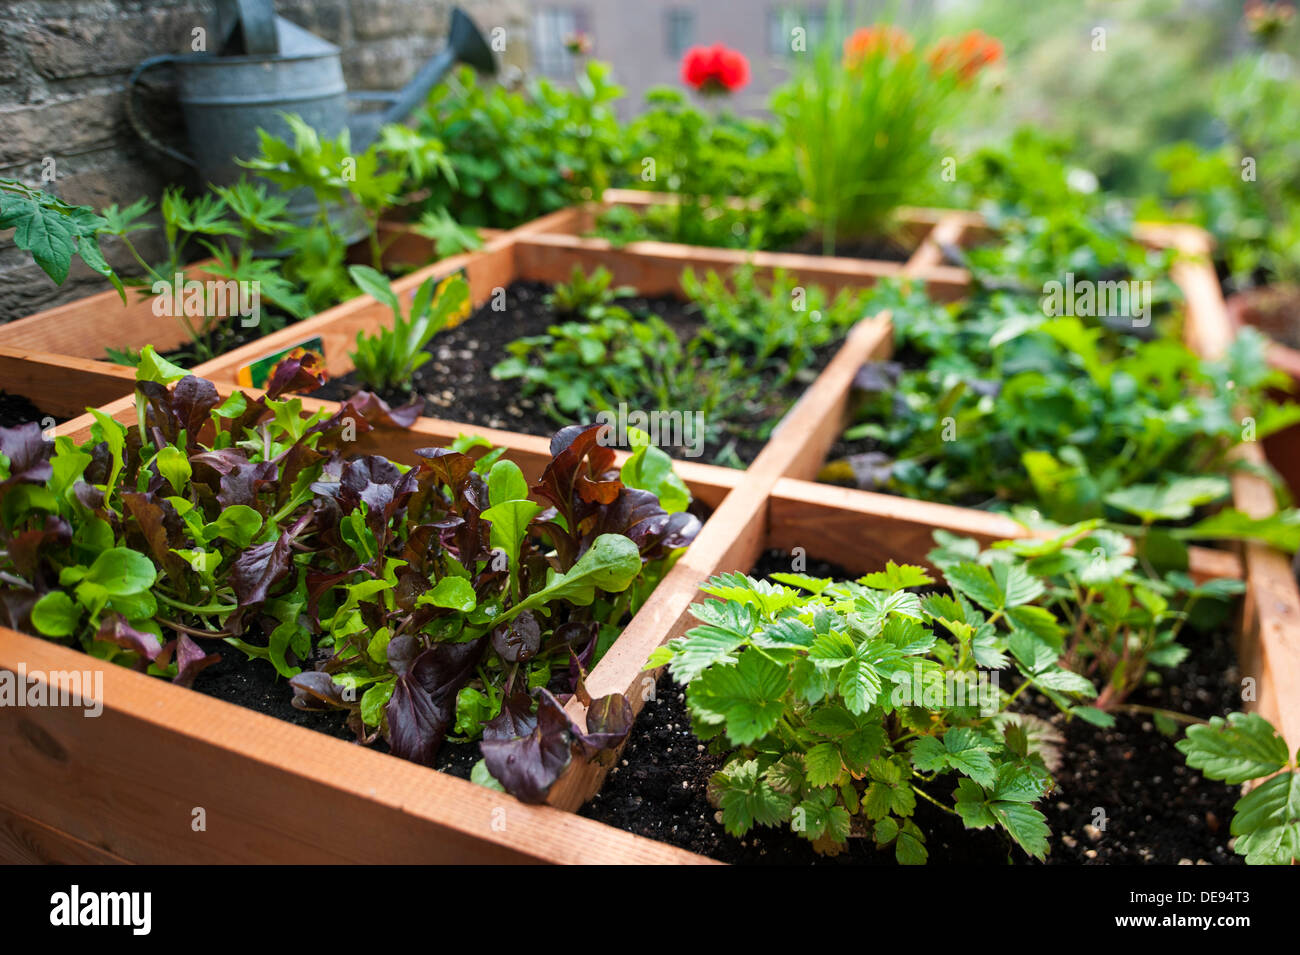 Square foot gardening by planting flowers, herbs and vegetables in ...